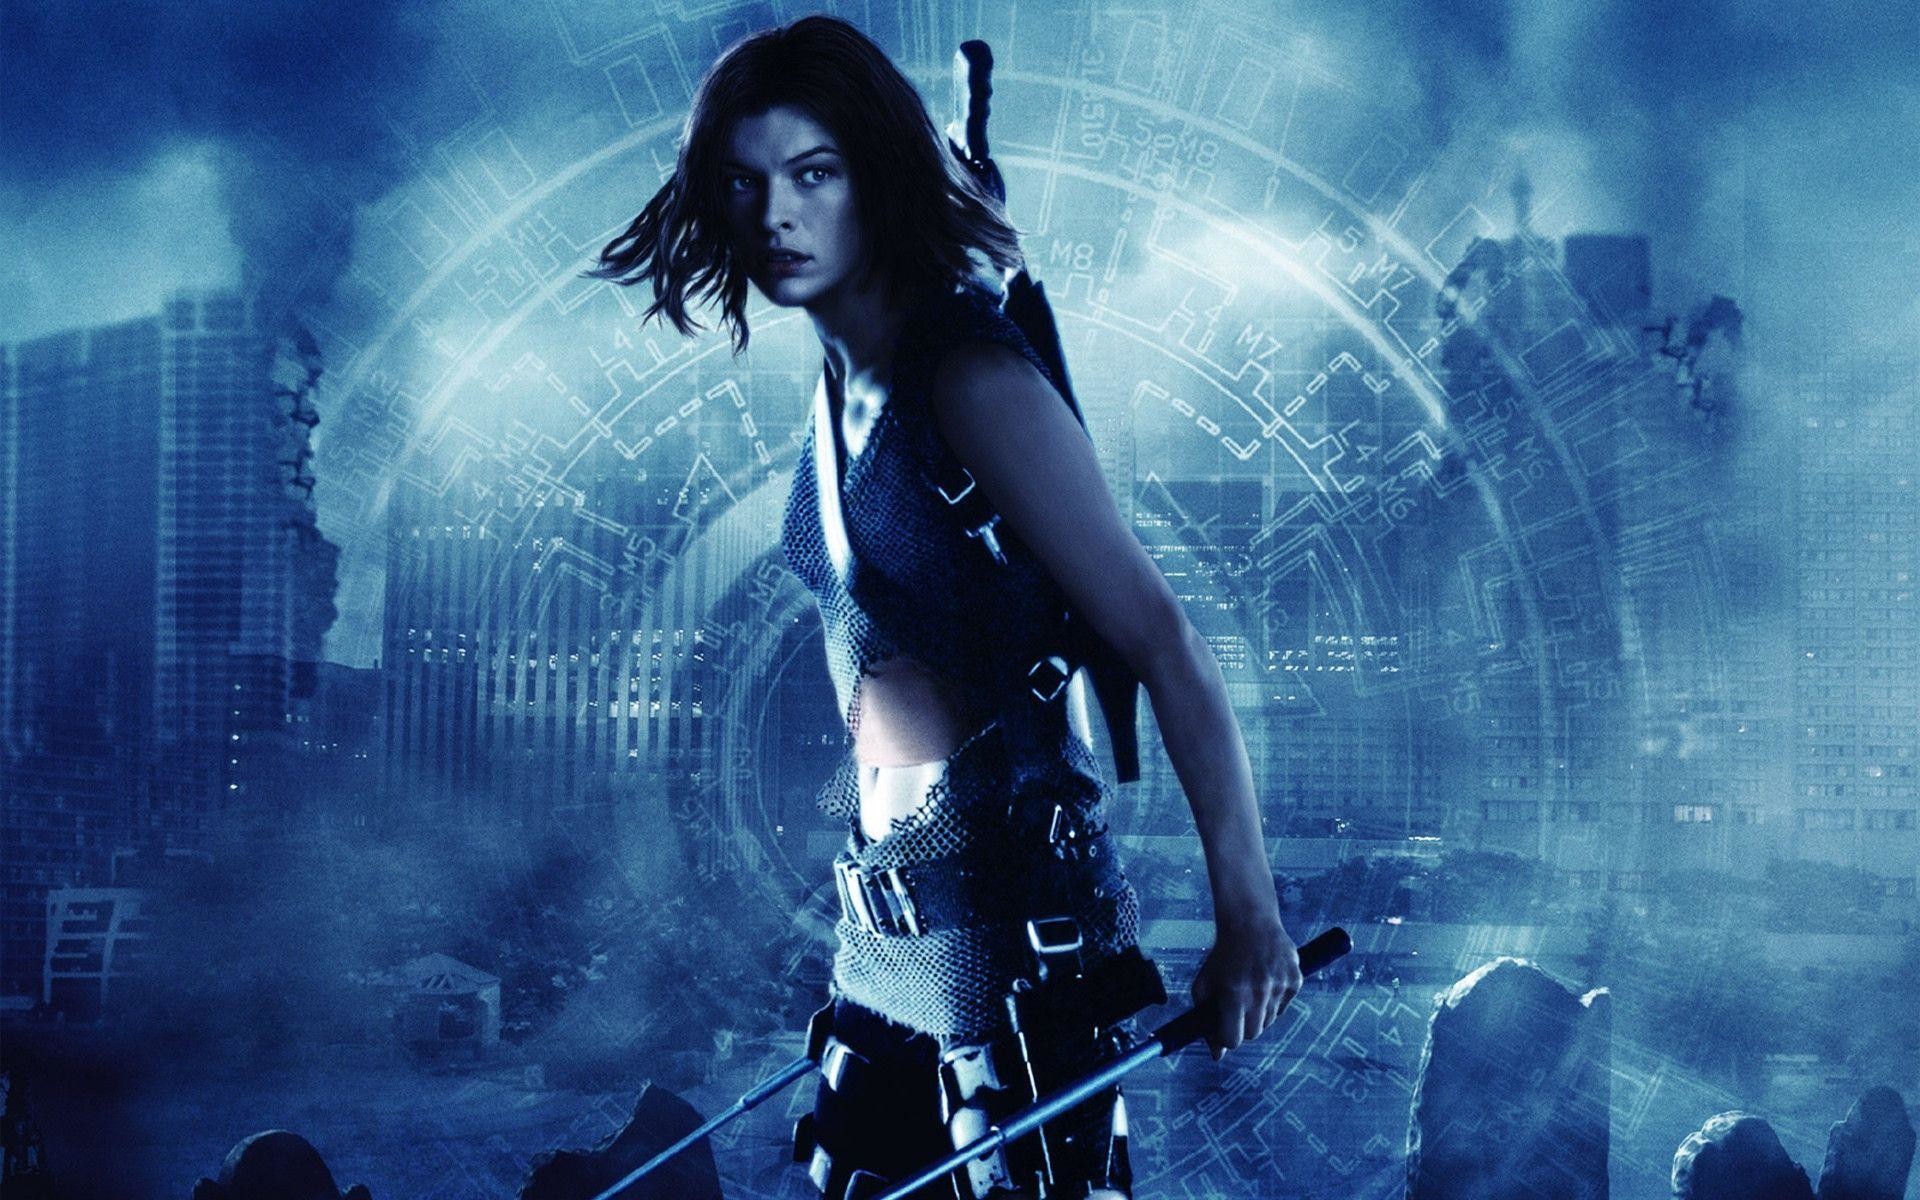 Milla Jovovich in Resident Evil 6 Wallpapers HD Wallpapers